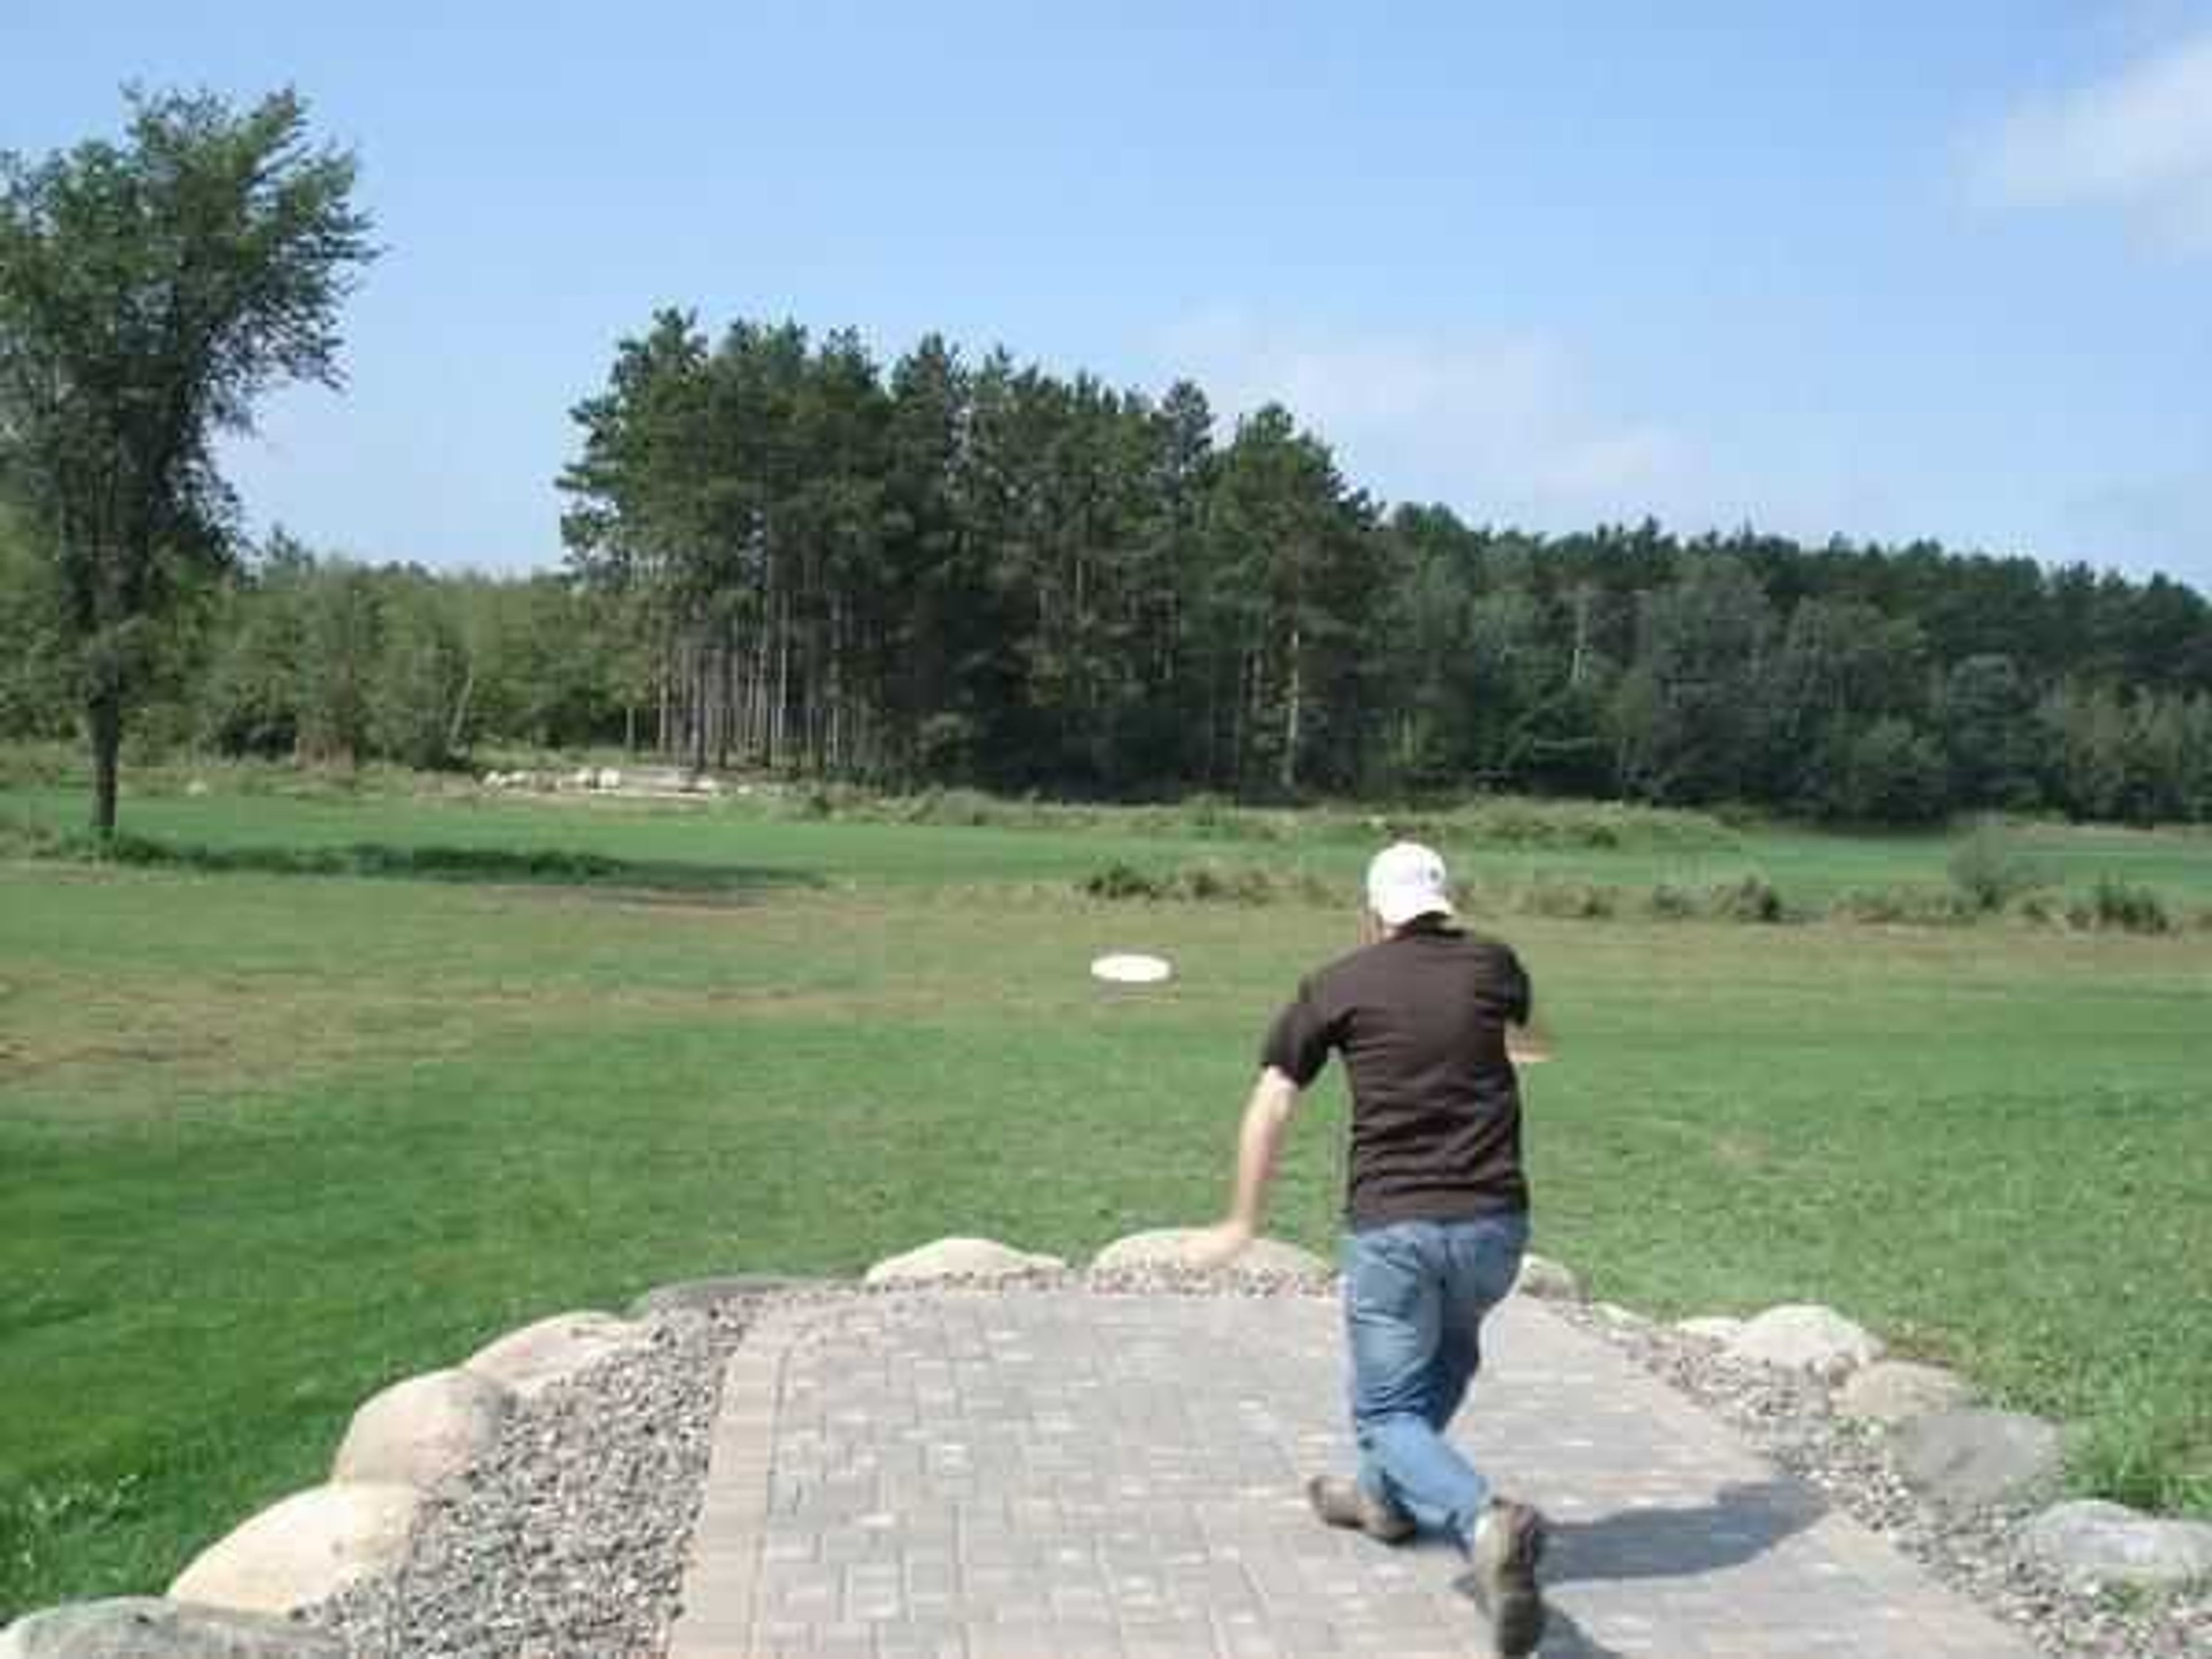 New 18-hole course to be built at cape county park north by popular demand